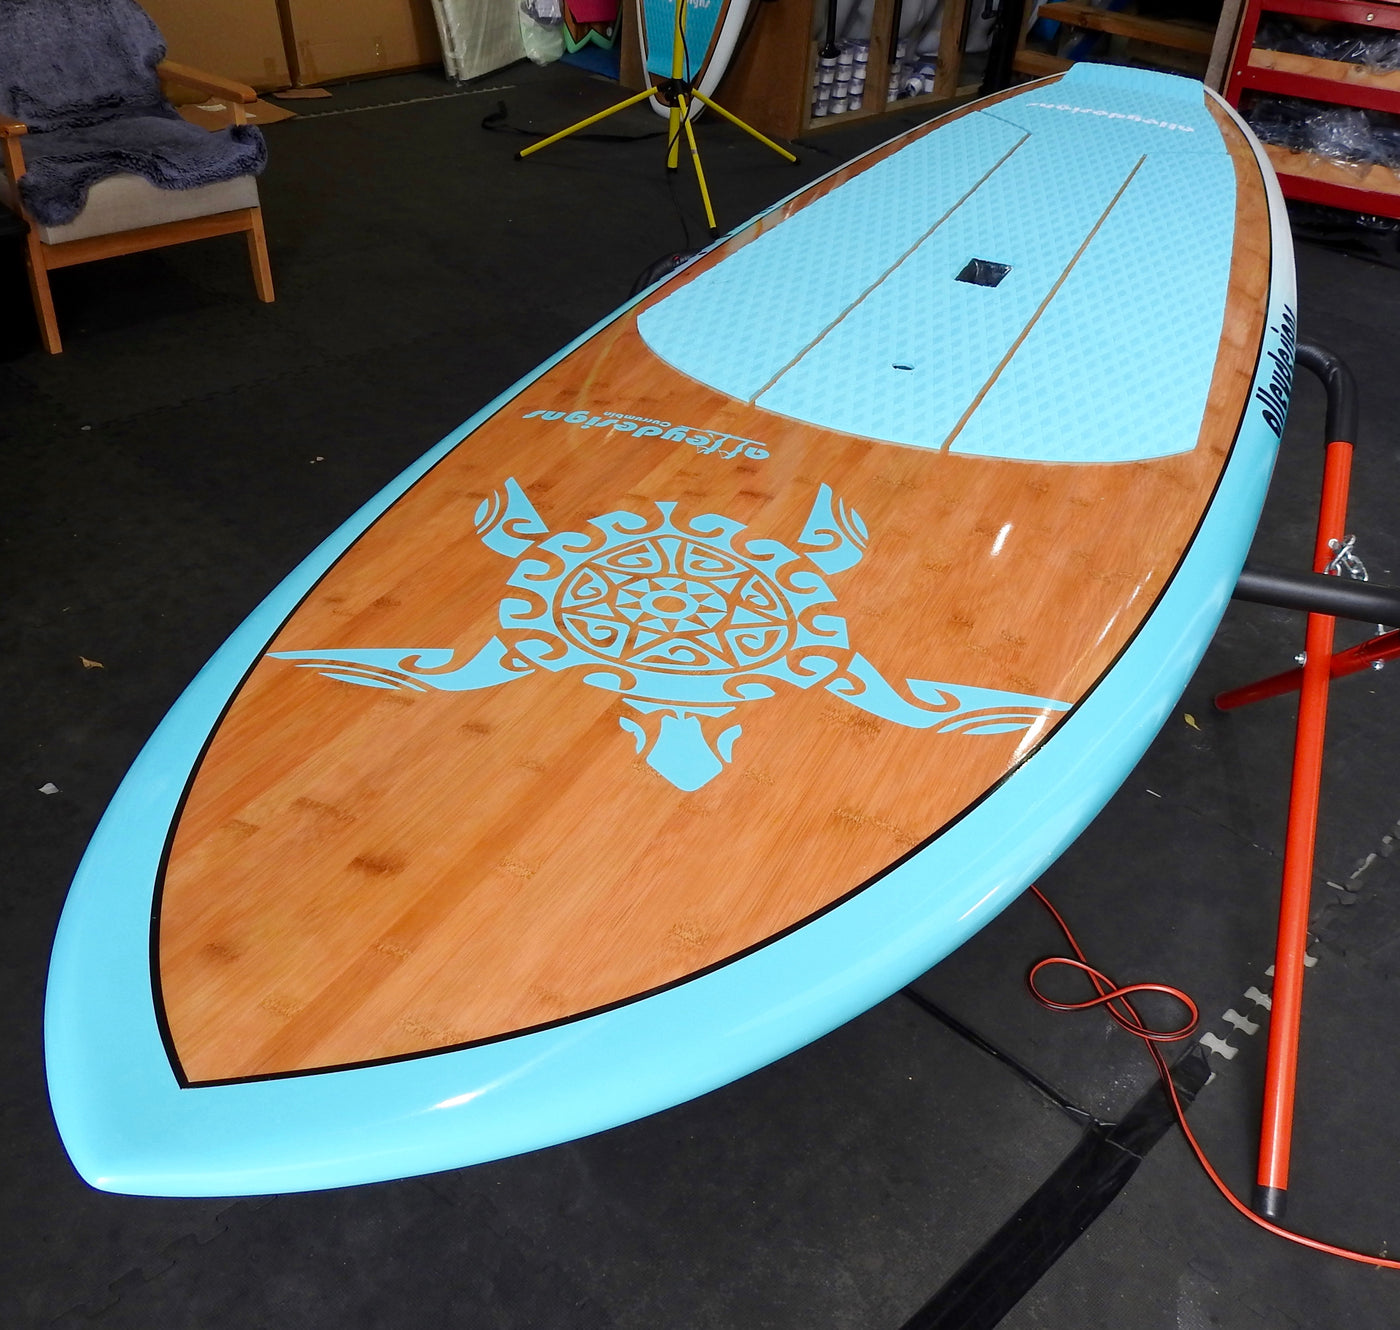 9'6" x 31" Bamboo Deck Teal Turtle Performance Alleydesigns SUP 8kg - Alleydesigns  Pty Ltd                                             ABN: 44165571264